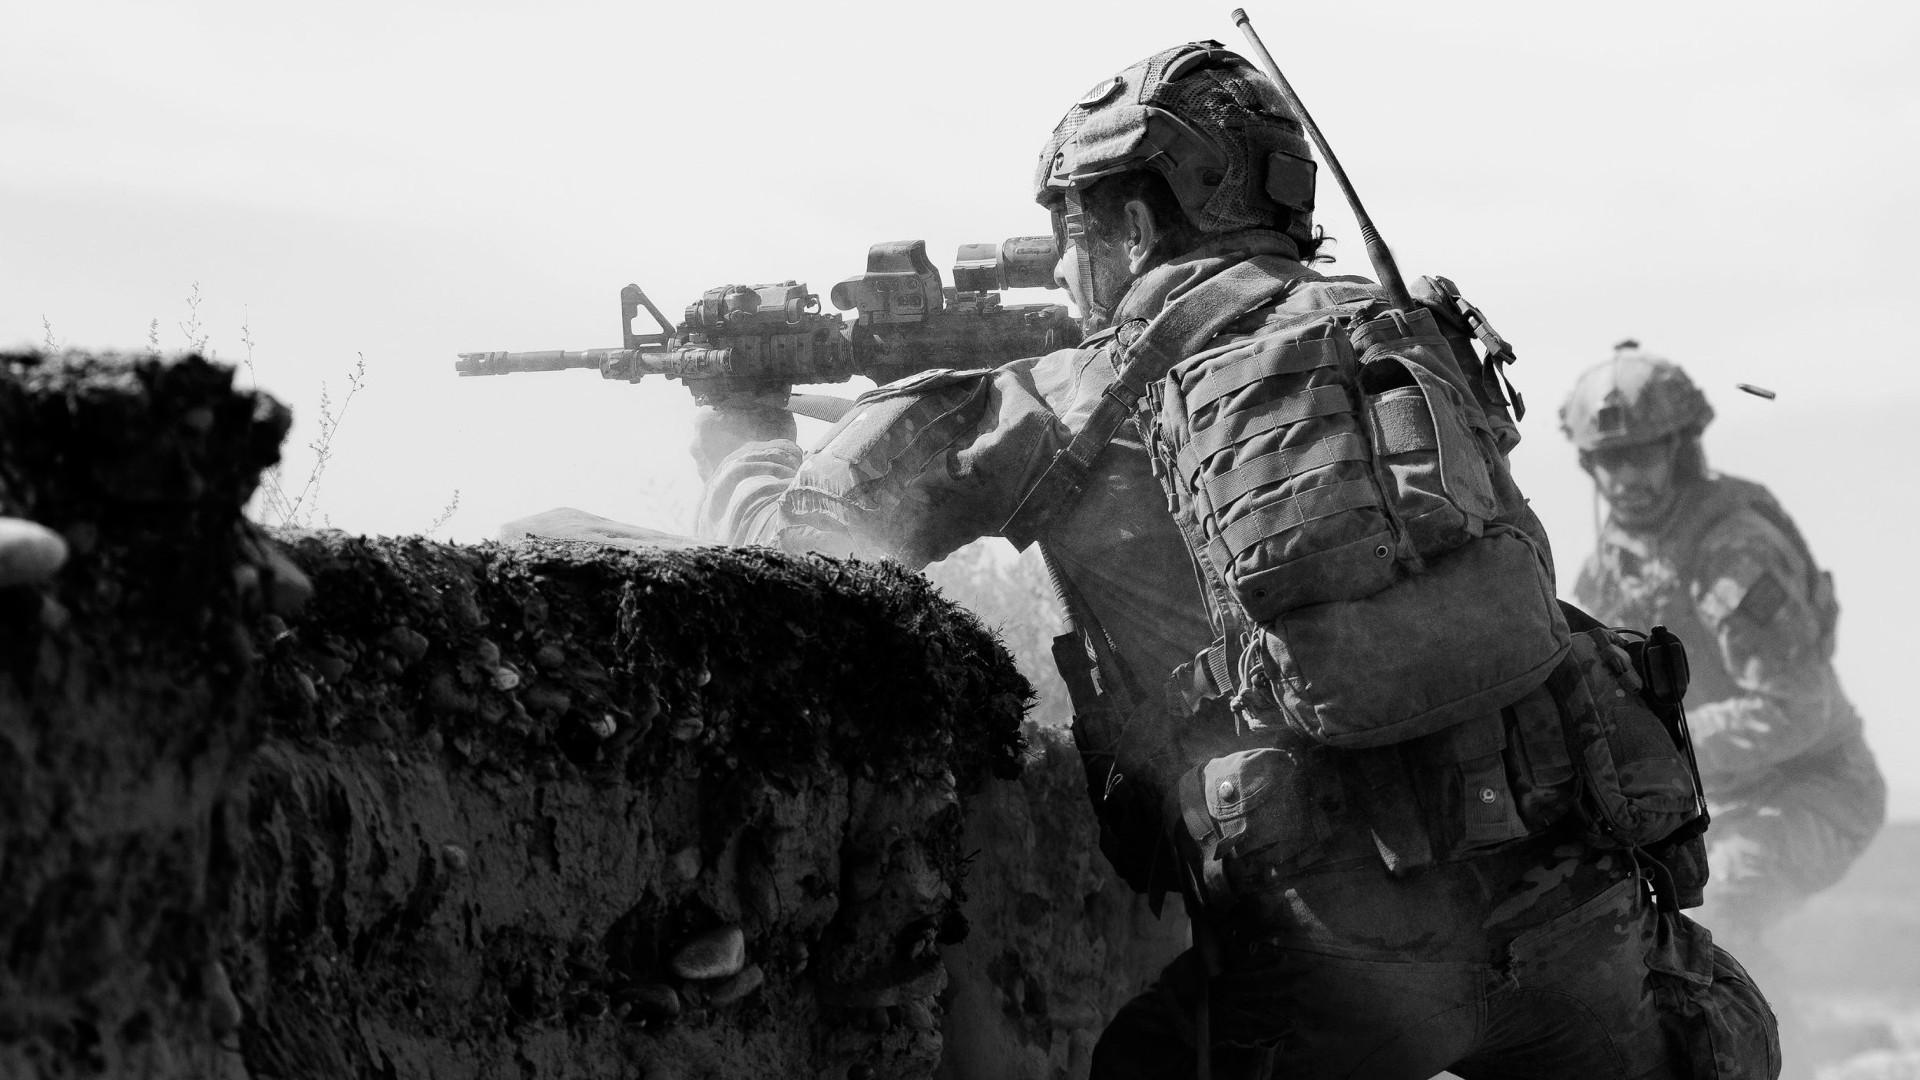 Wallpaper, 1920x1080 px, Australian Army, military, soldier, Special Air Service, special forces 1920x1080